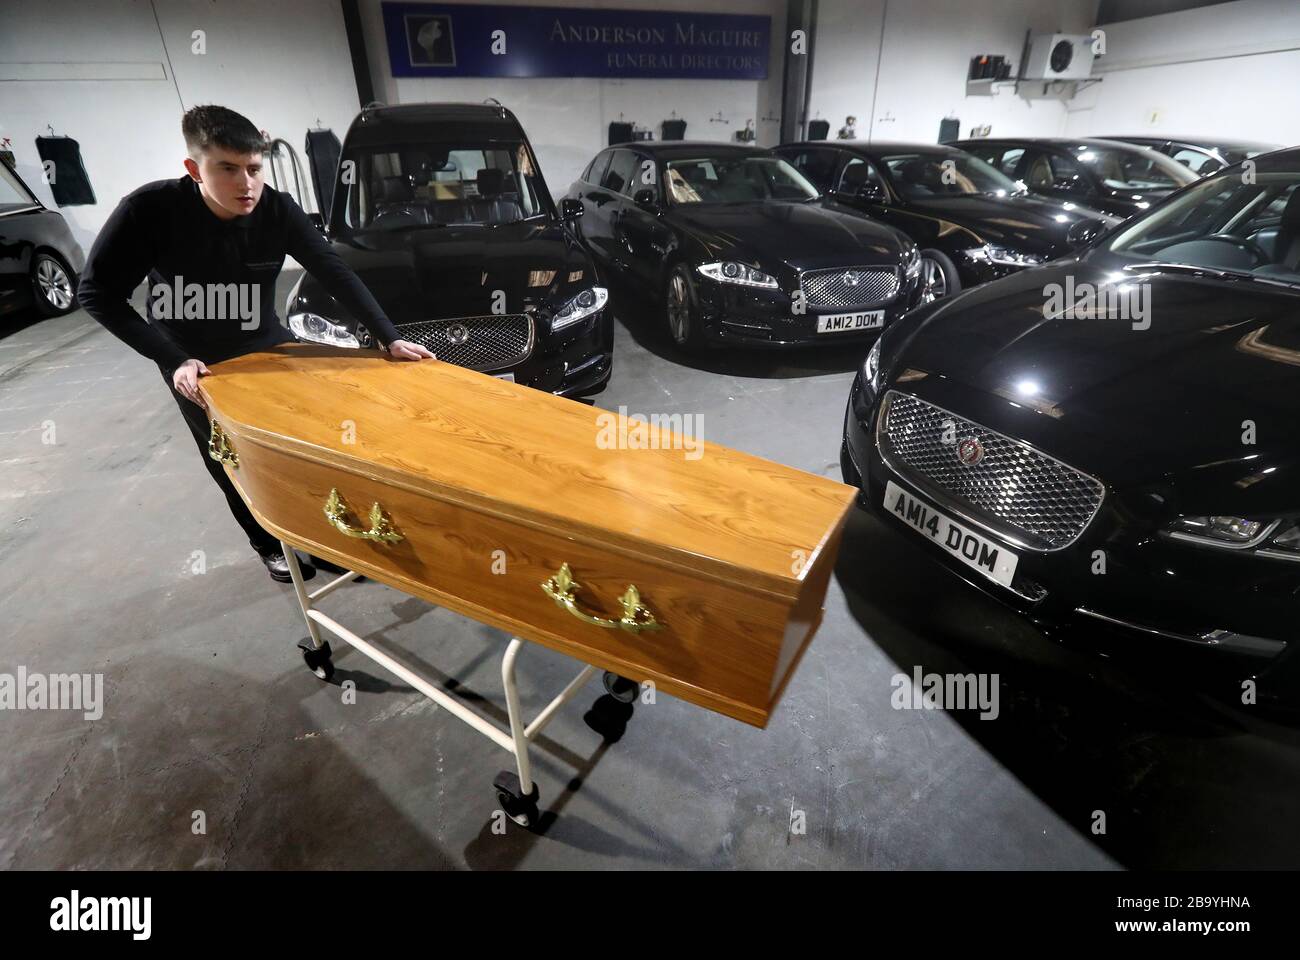 Declan Harley from Anderson Maguire Funeral Directors moves an empty coffin at their offices in Glasgow. Funeral directors in Scotland's largest city are facing a backlog and on the verge of running out of mortuary space, the head of one family firm has said. Funerals are unable to take place until deaths have been registered and face-to-face appointments at registry offices are unavailable following coronavirus guidance. Stock Photo